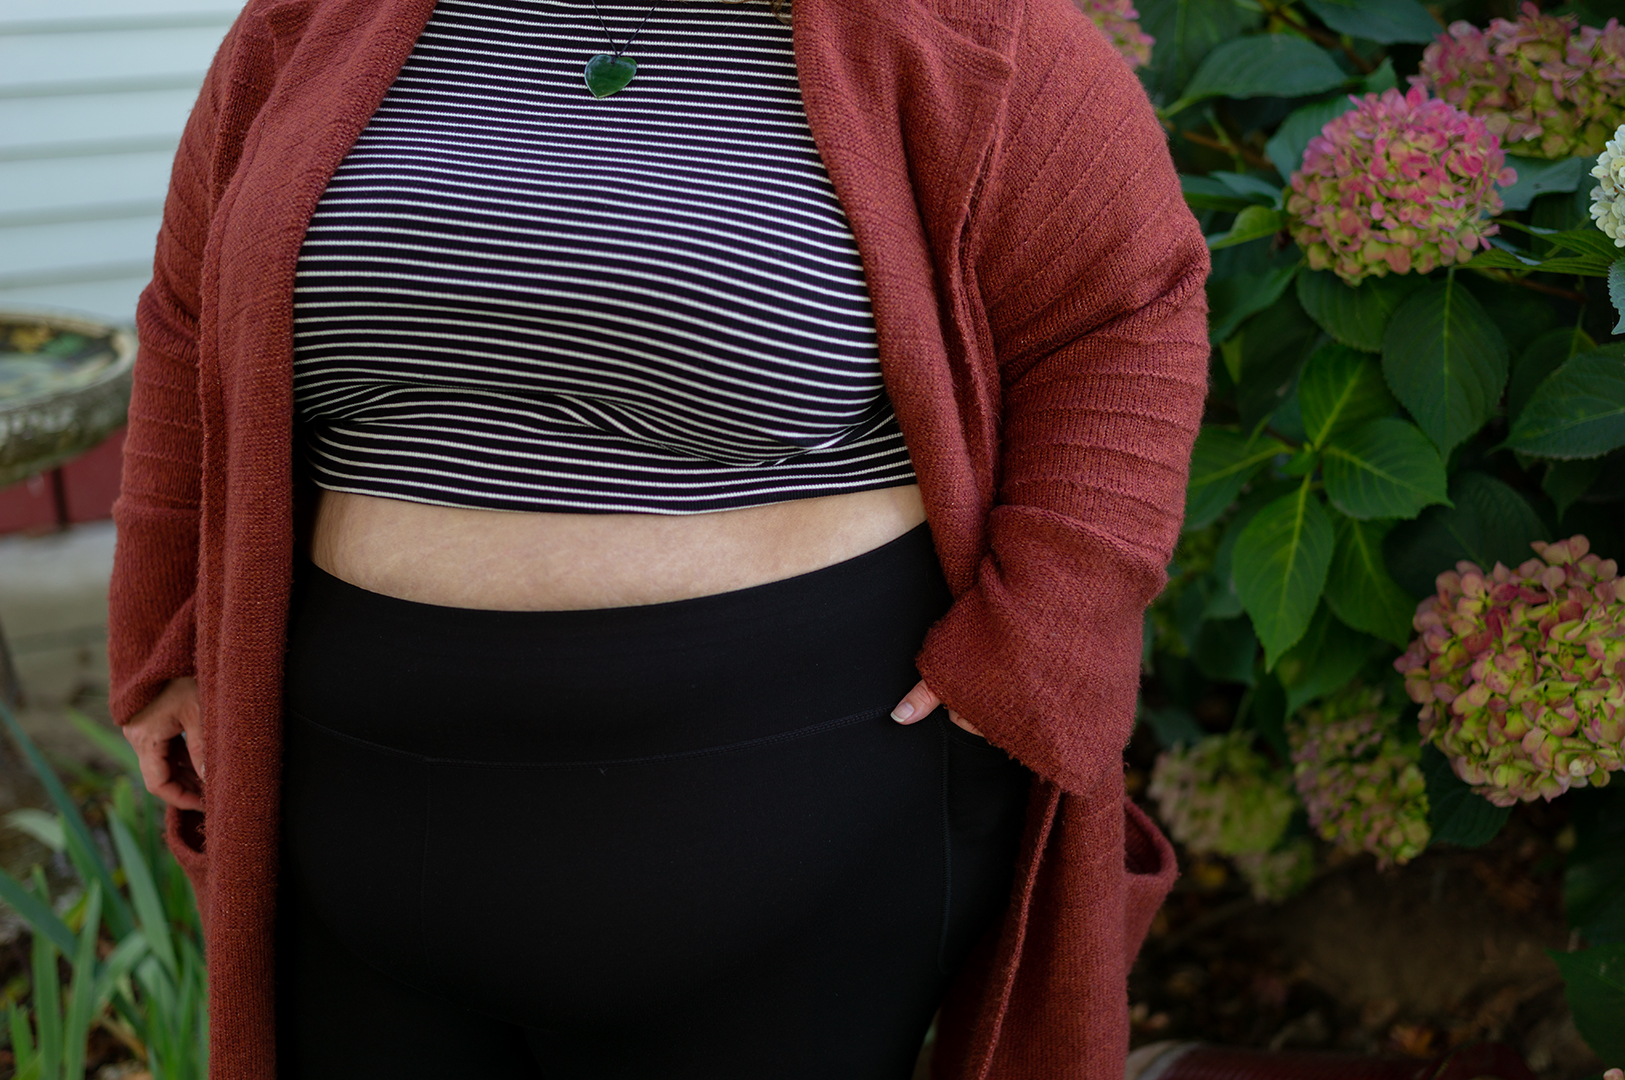 New Zealand plus size blogger Meagan Kerr stands in front of a hydrangrea bush. The photo is cropped to show from just below her chin to her hips, and she is standing with one hand in the pocket of her leggings. Meagan wears a midriff baring City Chic Cheeky Stripe Top in XXL, Snag Tights Leggings in H, Old Navy Rust Cardigan in 4X